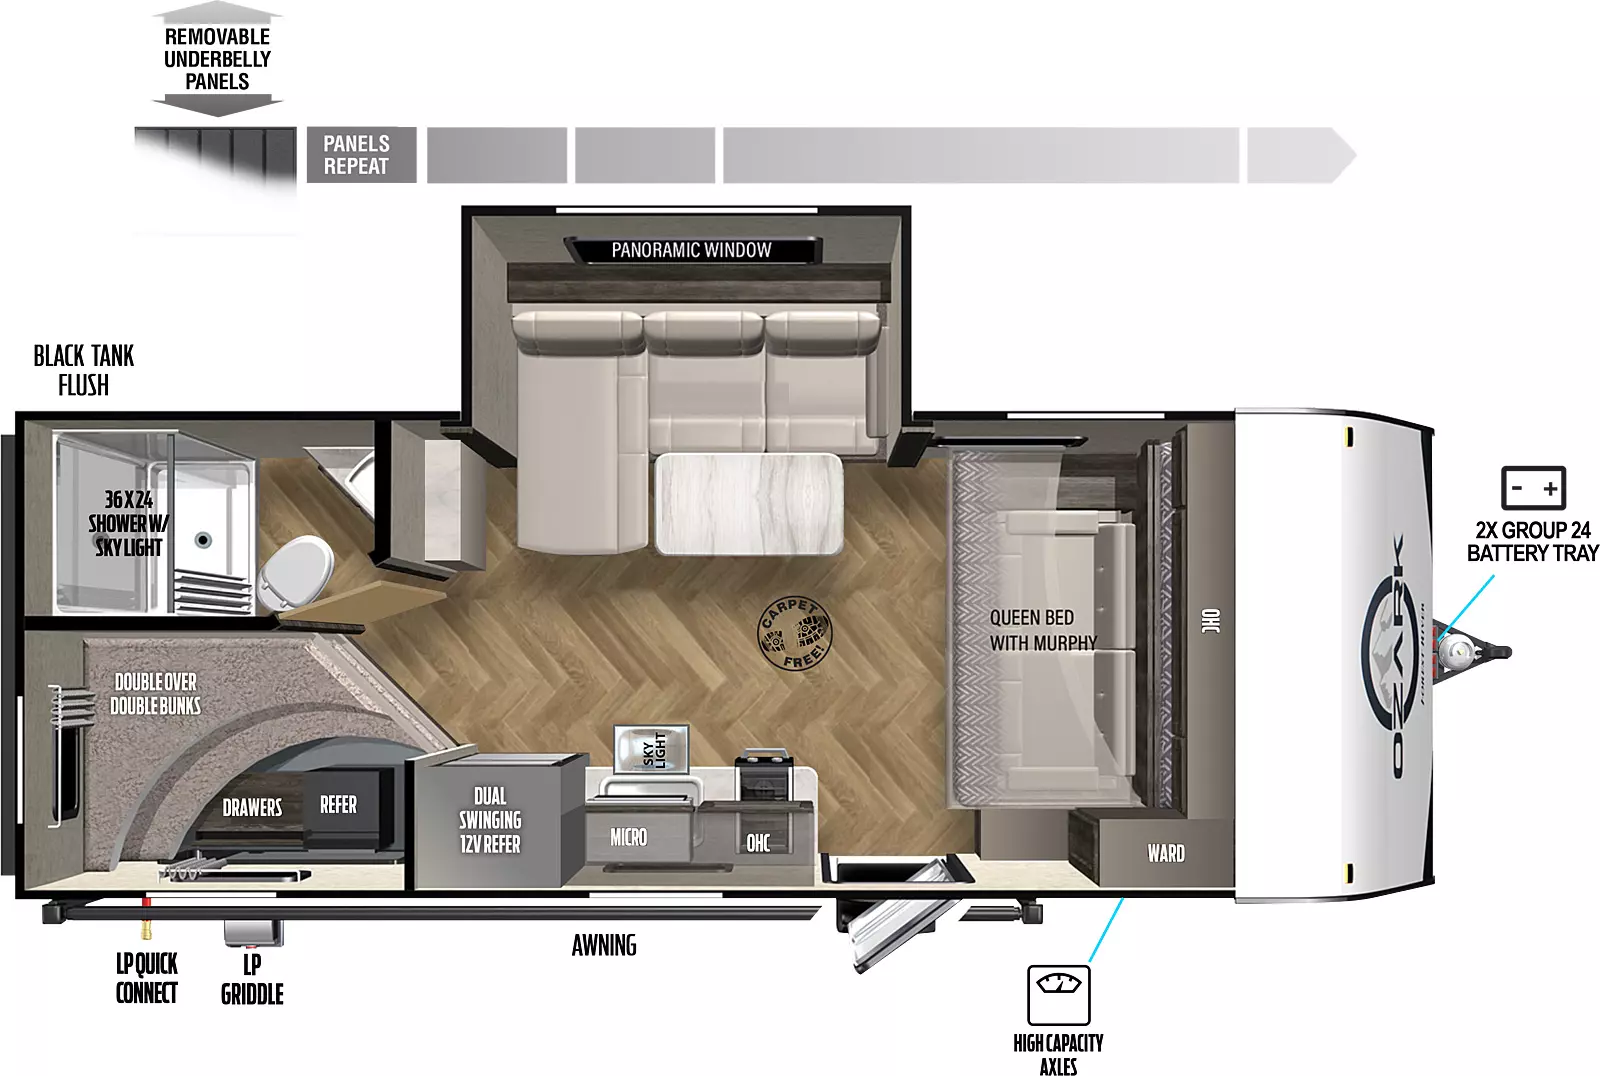 The 1680BSK has one slideout and one entry. Exterior features include removeable underbelly panels, solar extended 200 watt power package, outside kitchen, quick drop stabilizer jacks, awning, and high capacity axles. Interior layout front to back: Queen murphy bed sofa with overhead cabinets and door side wardrobe; entry door; door side kitchen with overhead cabinet, cooktop, microwave, sink, dual swinging 12 volt refrigerator, and skylight; carpet free; off-door side slideout with panoramic window and dinette; rear door side double over double bunks; rear off-door side bathroom with shower with skylight.